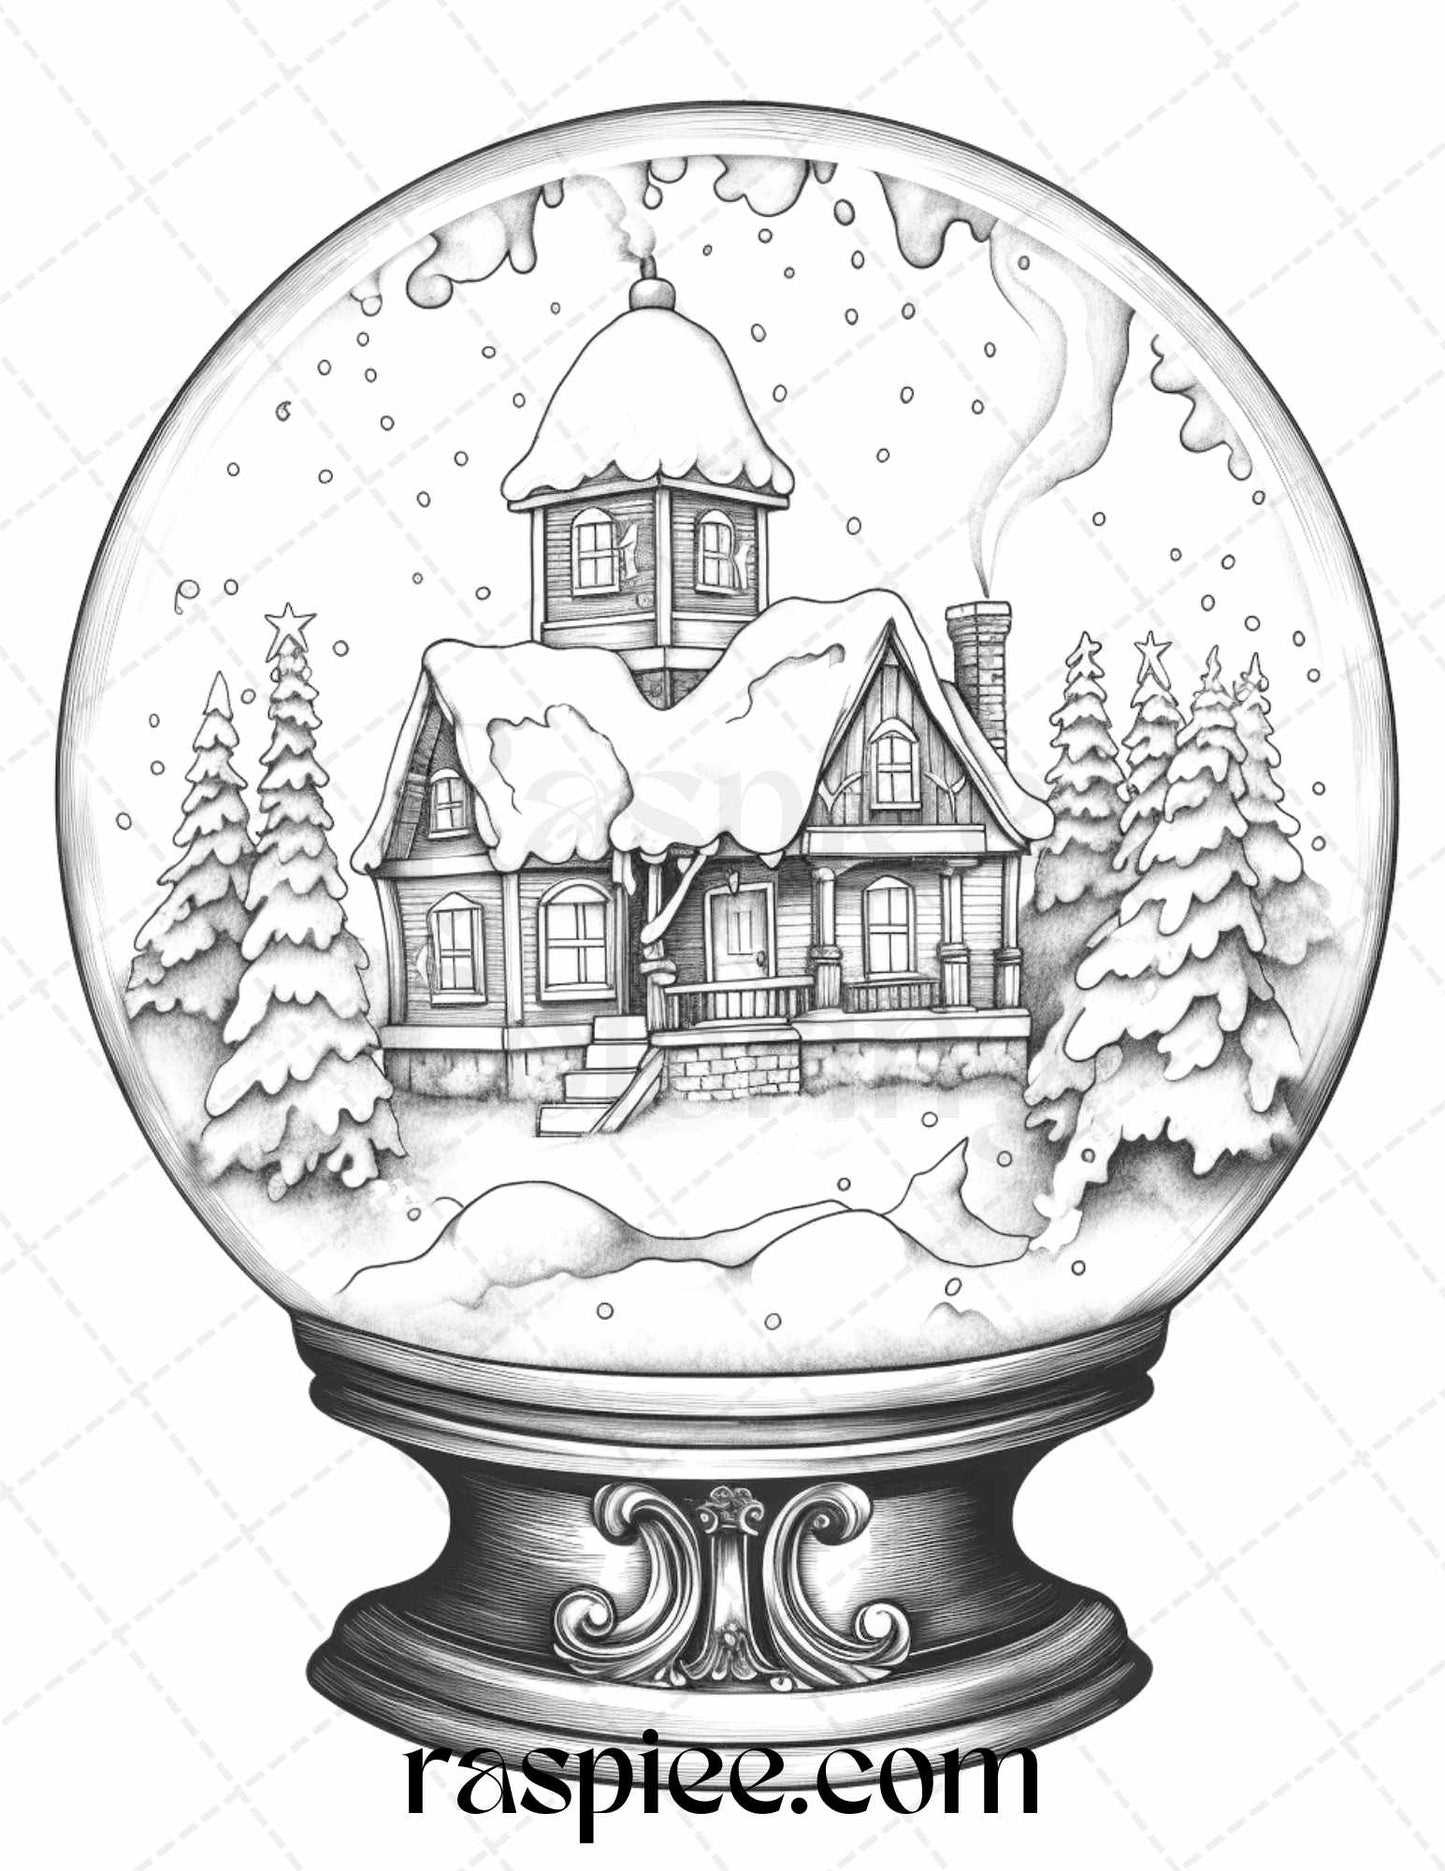 Snow Globe Grayscale Coloring Page, Cozy Cabin Winter Coloring Printable, Relaxing Snow Scene Adult Coloring, Detailed Winter Cabin Artwork, Intricate Holiday Coloring Page